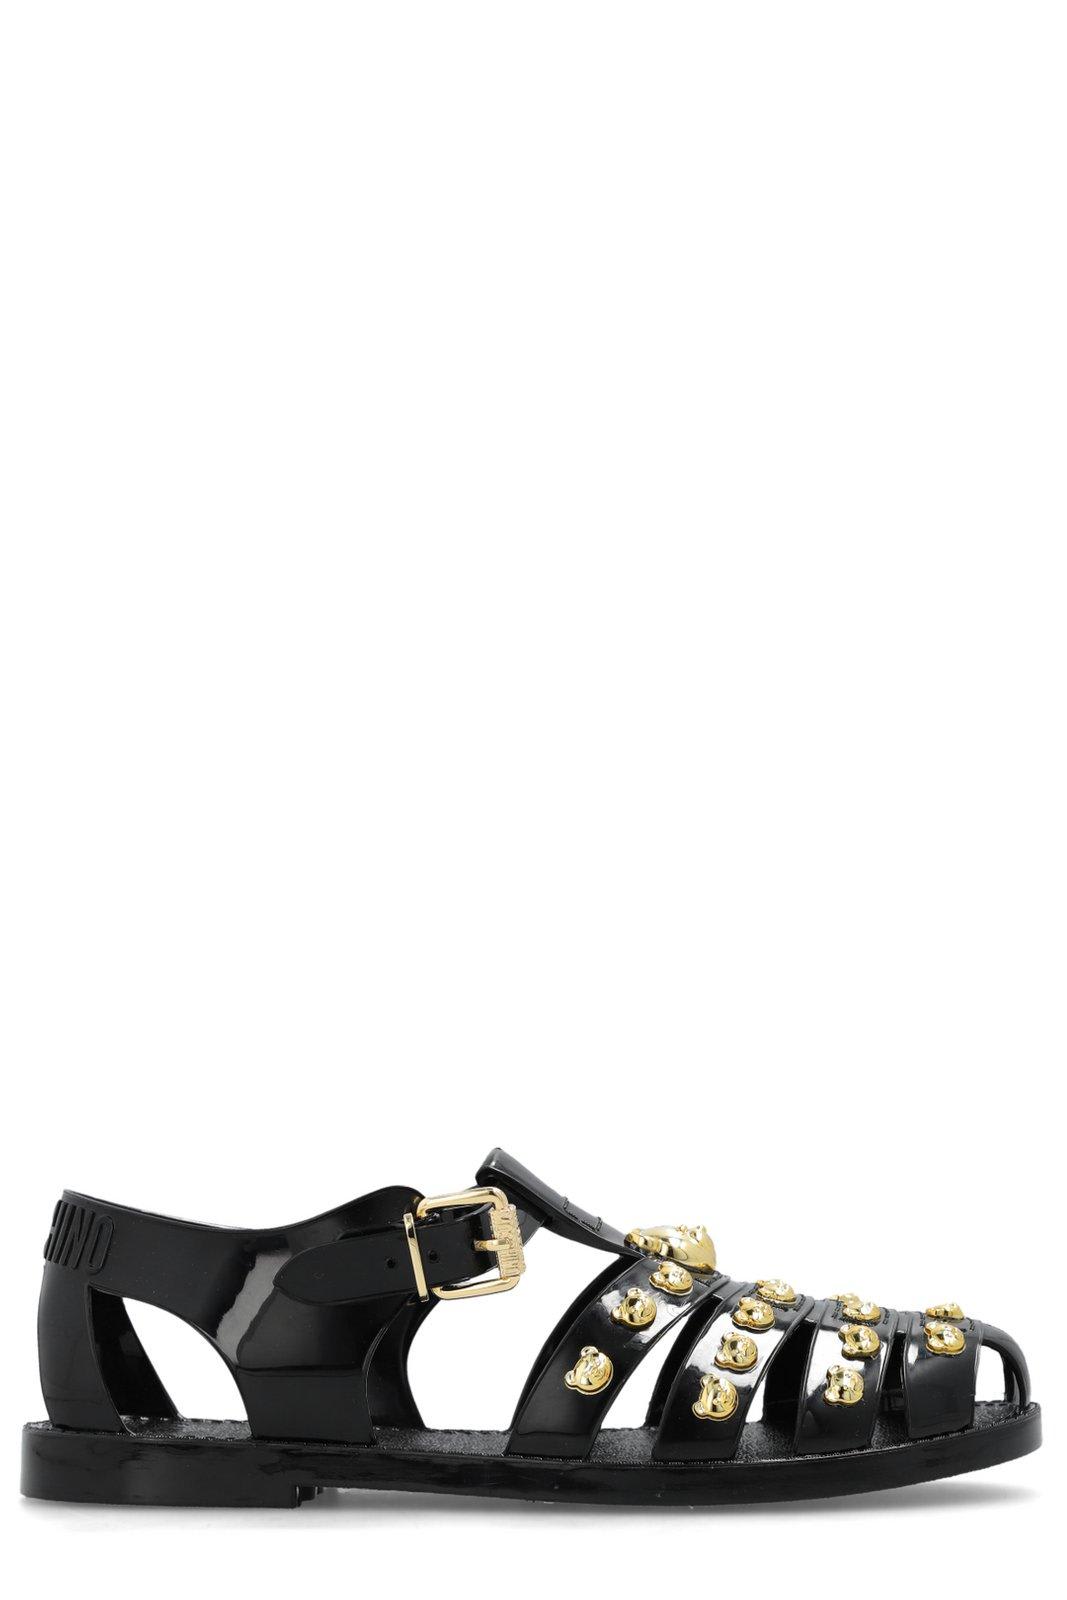 Shop Moschino Teddy Studs Jelly Sandals In Black